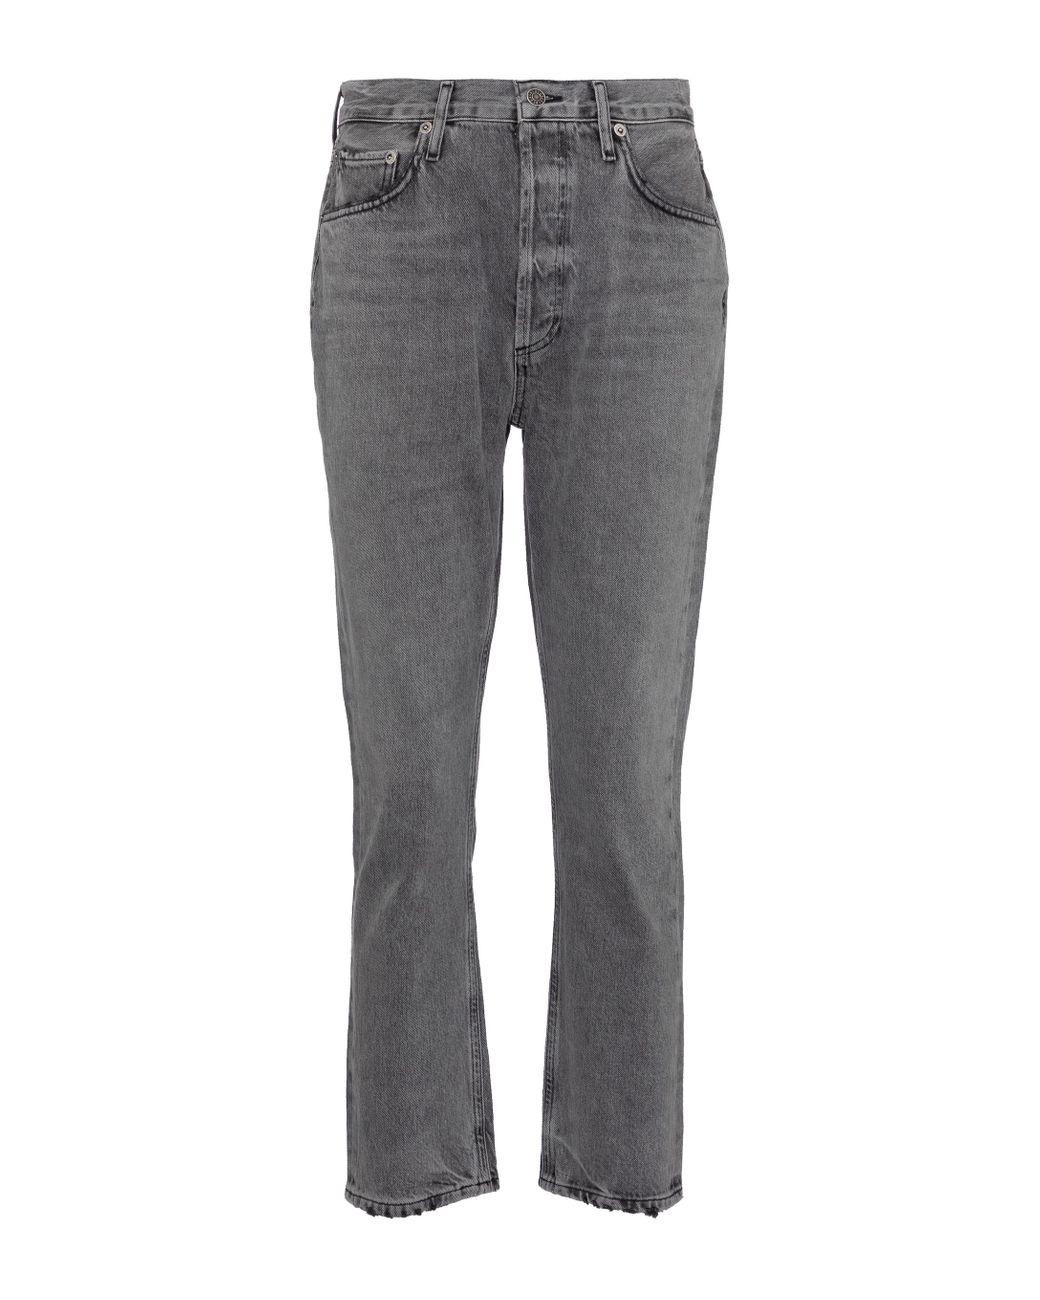 Agolde Denim Riley High-rise Straight Cropped Jeans in Grey (Gray) - Lyst